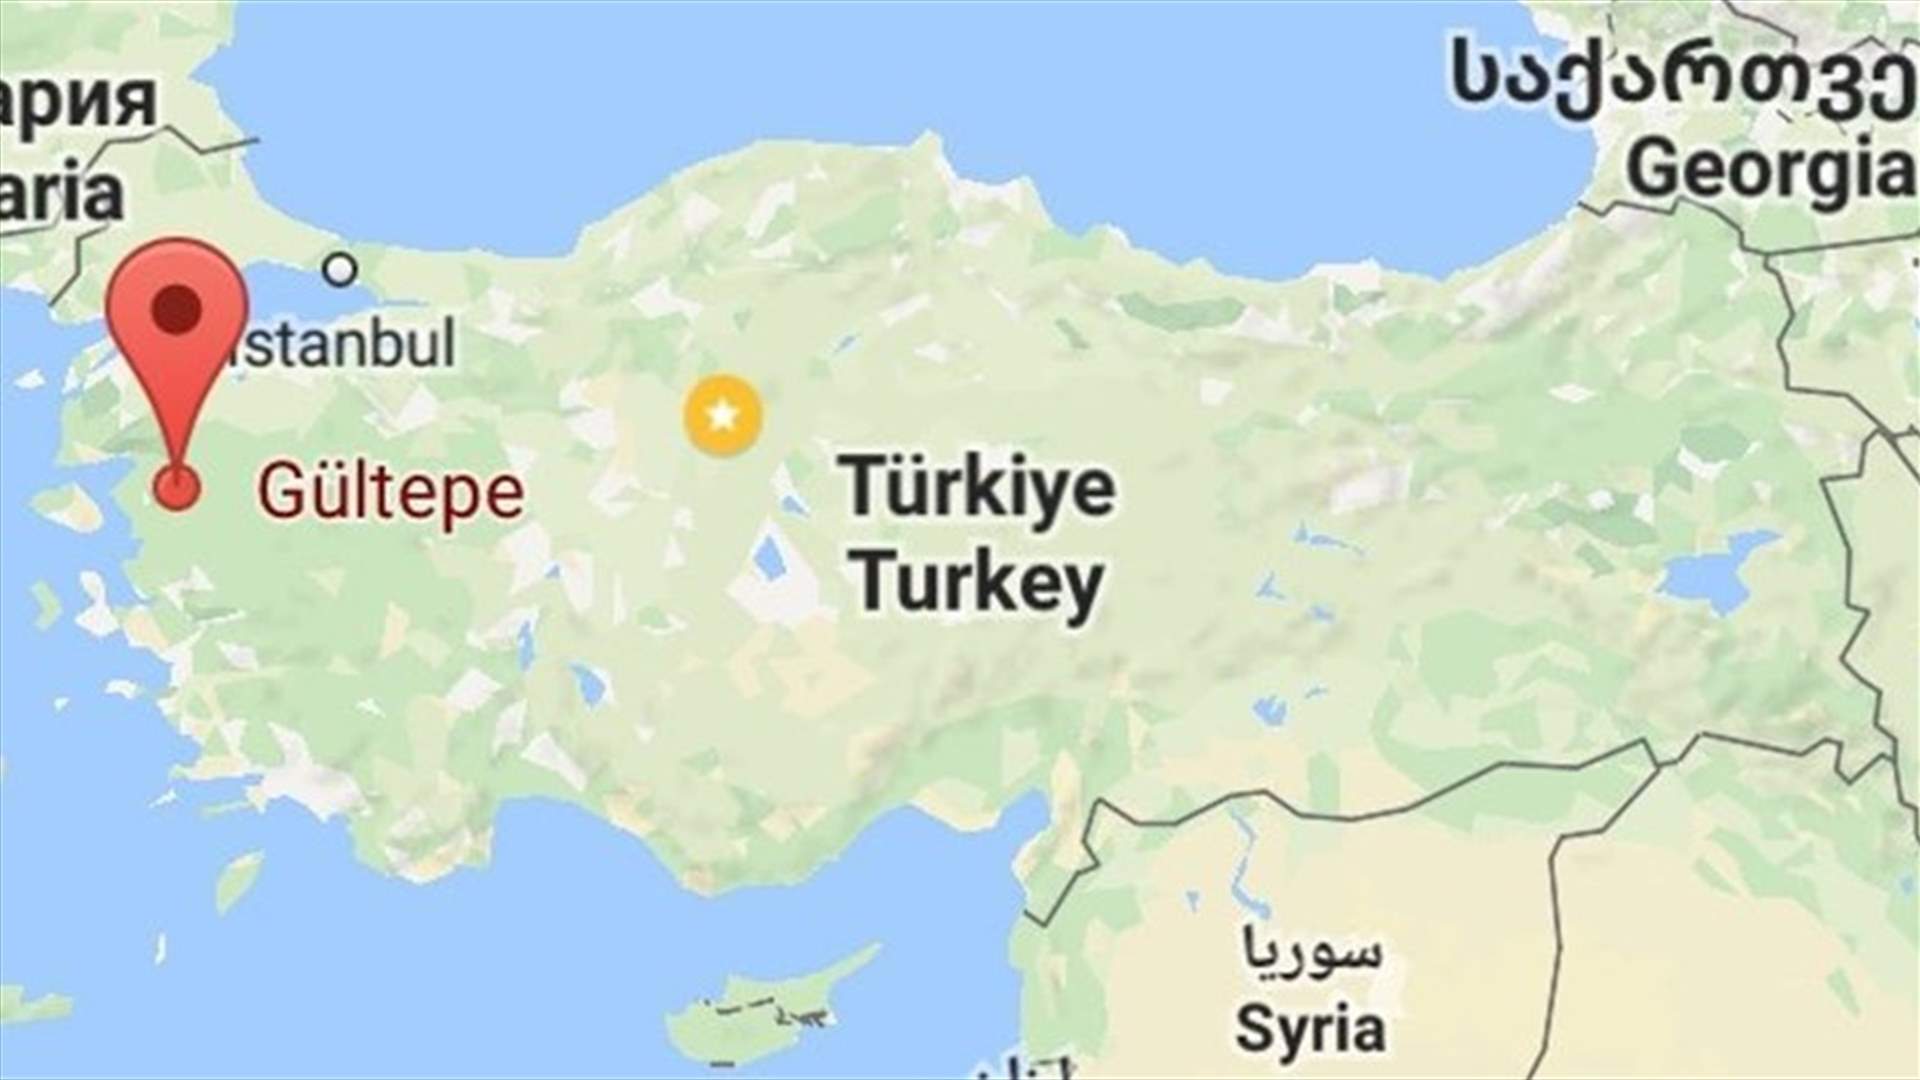 Blast damages wall next to NATO military area in Turkey - media